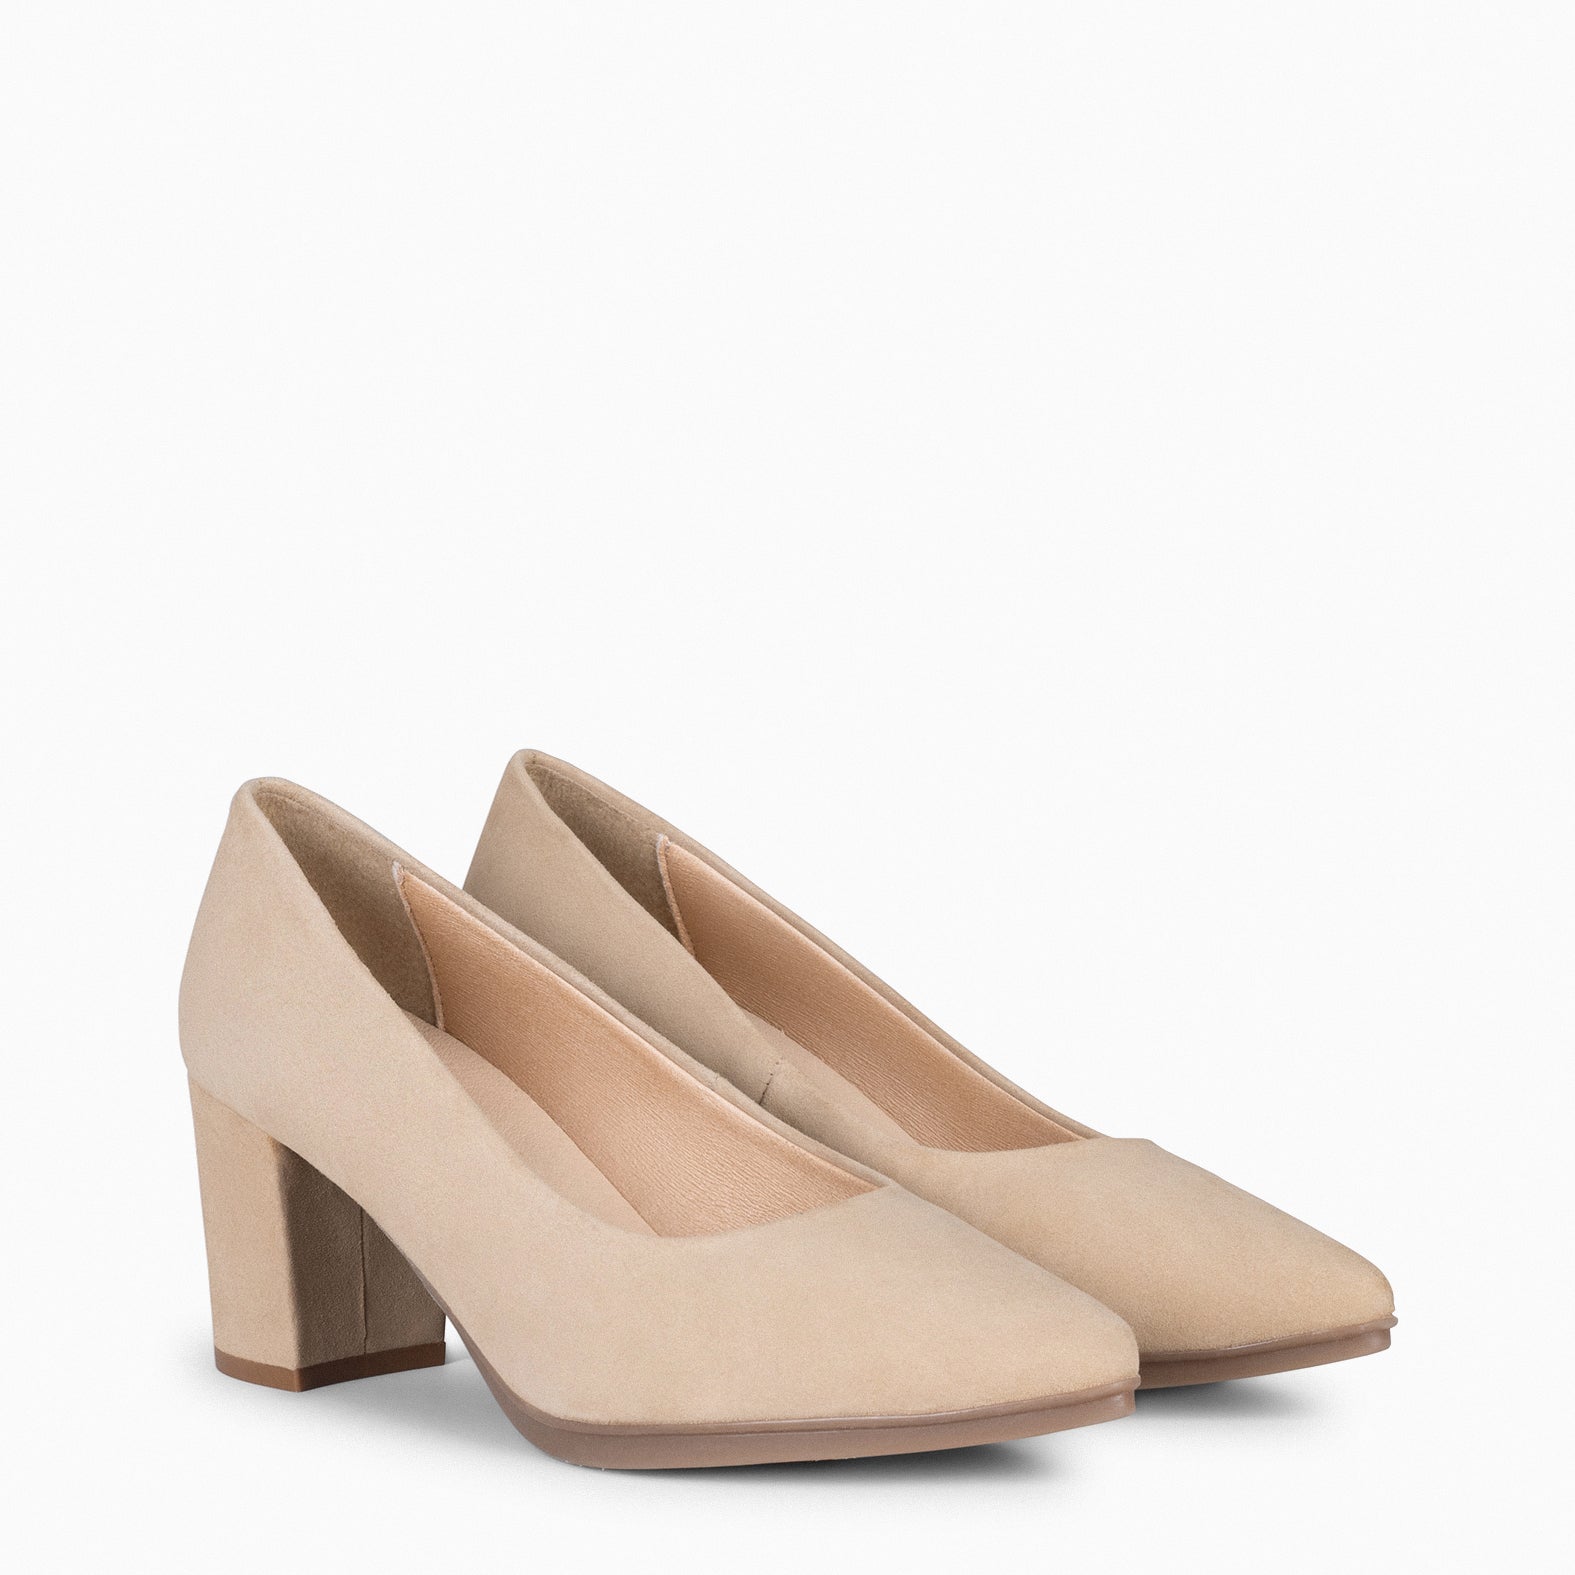 URBAN S – BEIGE Suede Mid-Heeled Shoes 